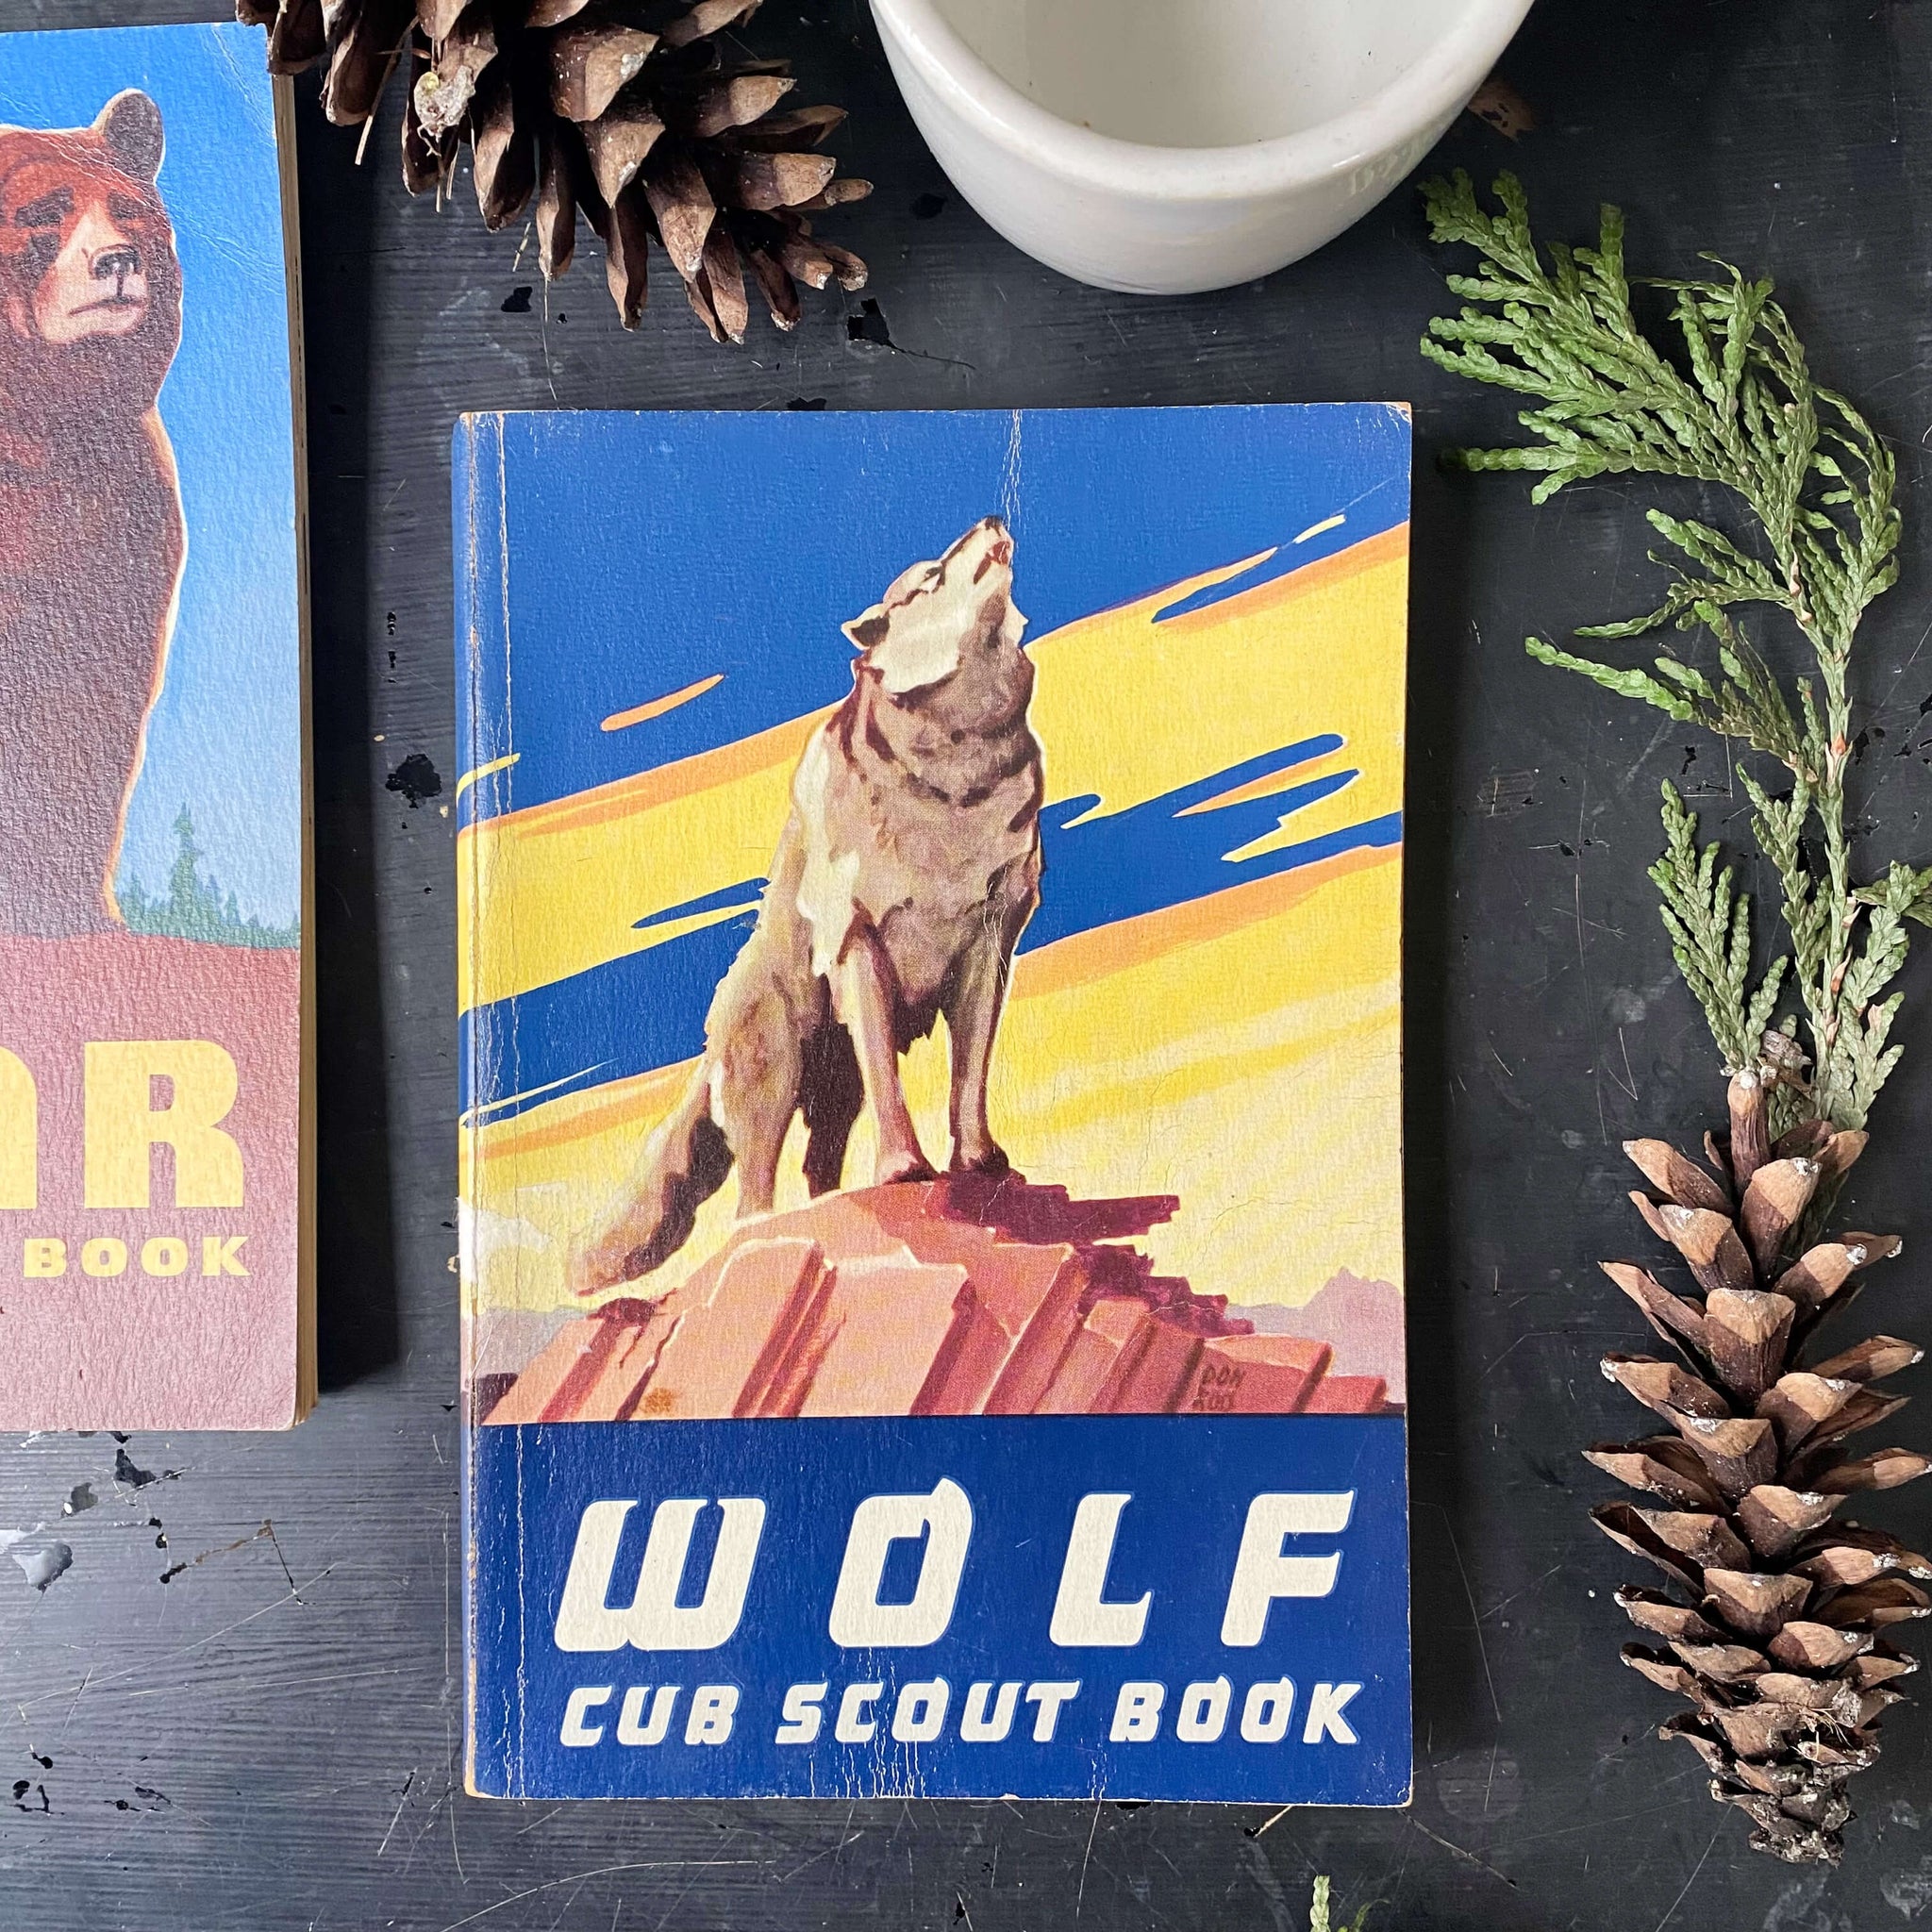 Vintage Midcentury Boy Scout & Cub Scout Book Collection - Set of Three - Bear, Wolf & Boy Scout circa 1959-1967